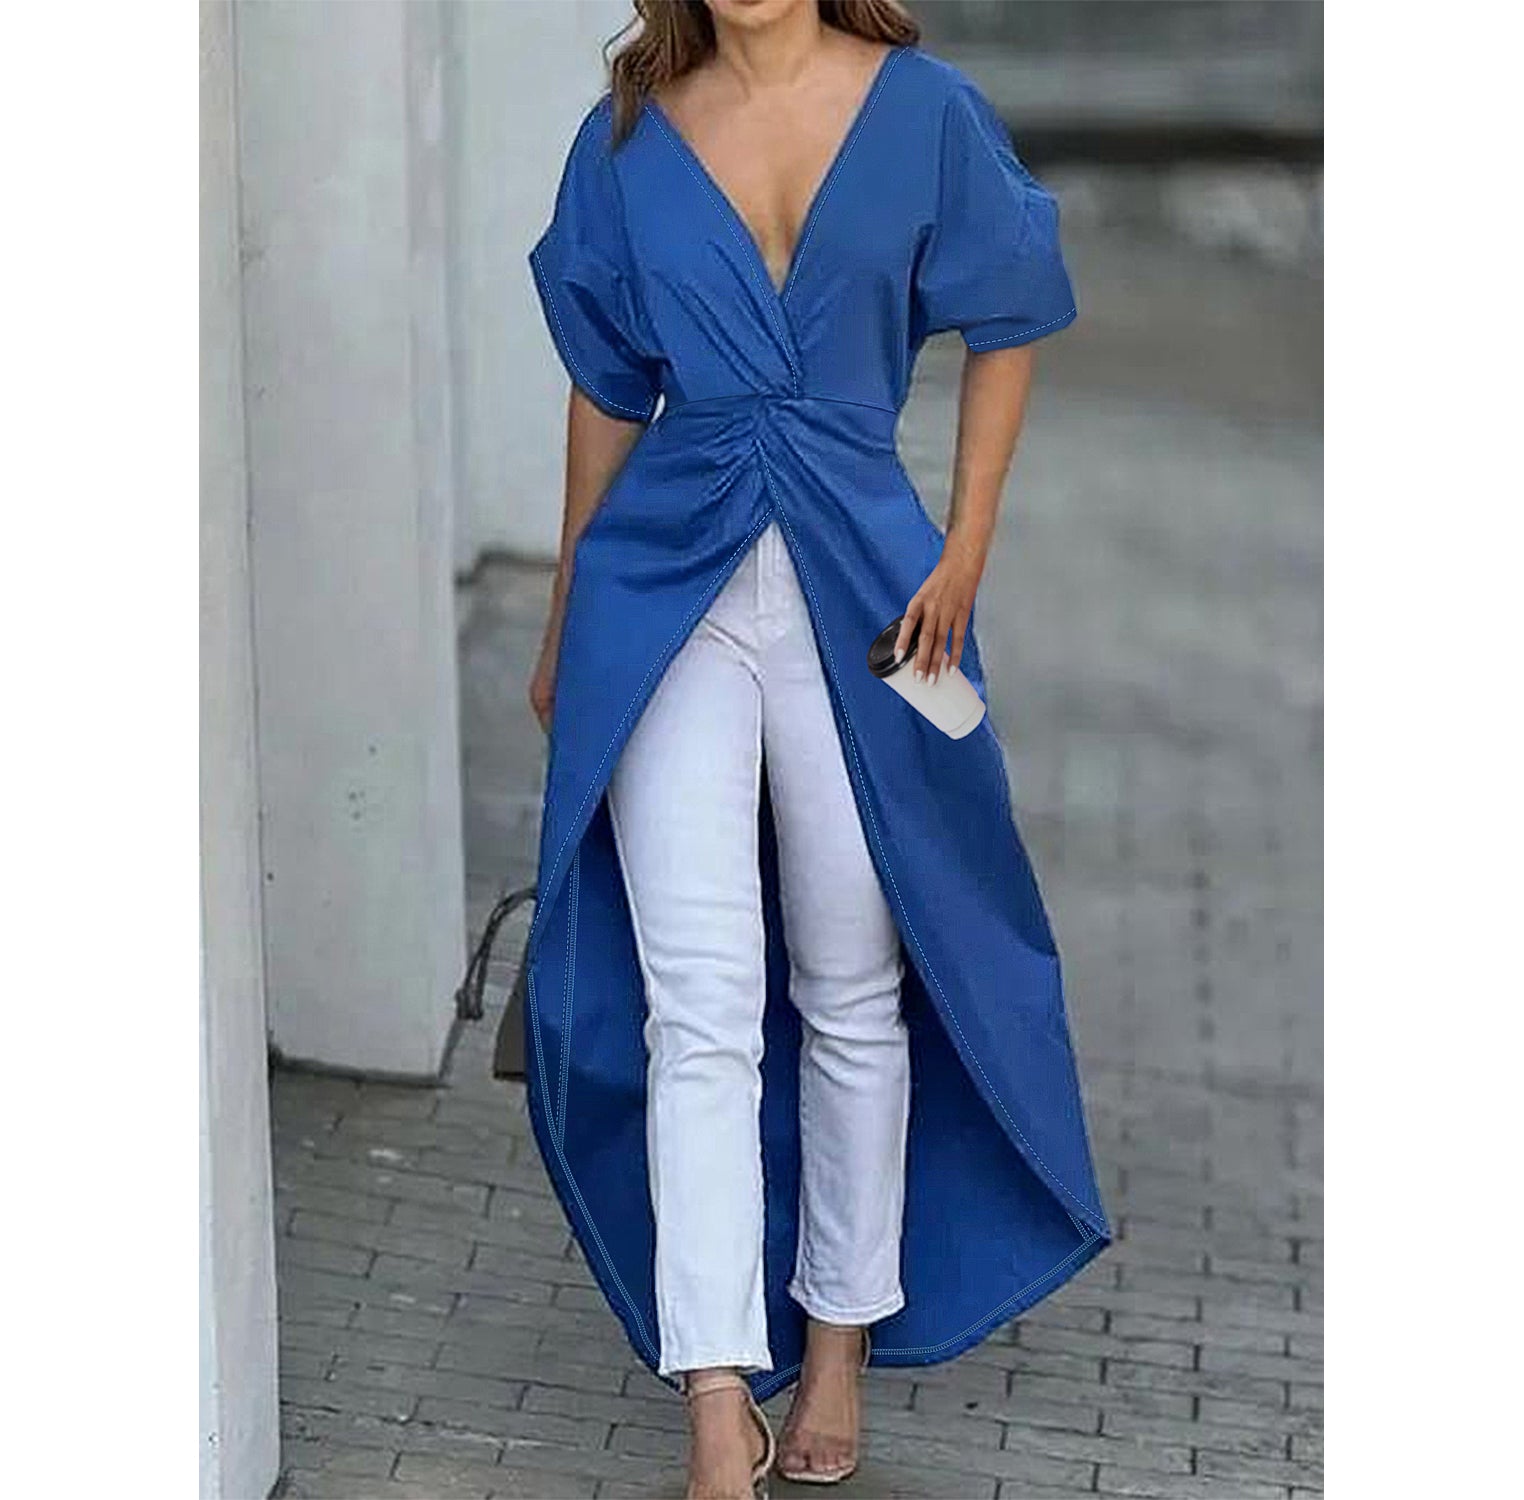 Woman outdoors wearing short sleeve blue high low blouse